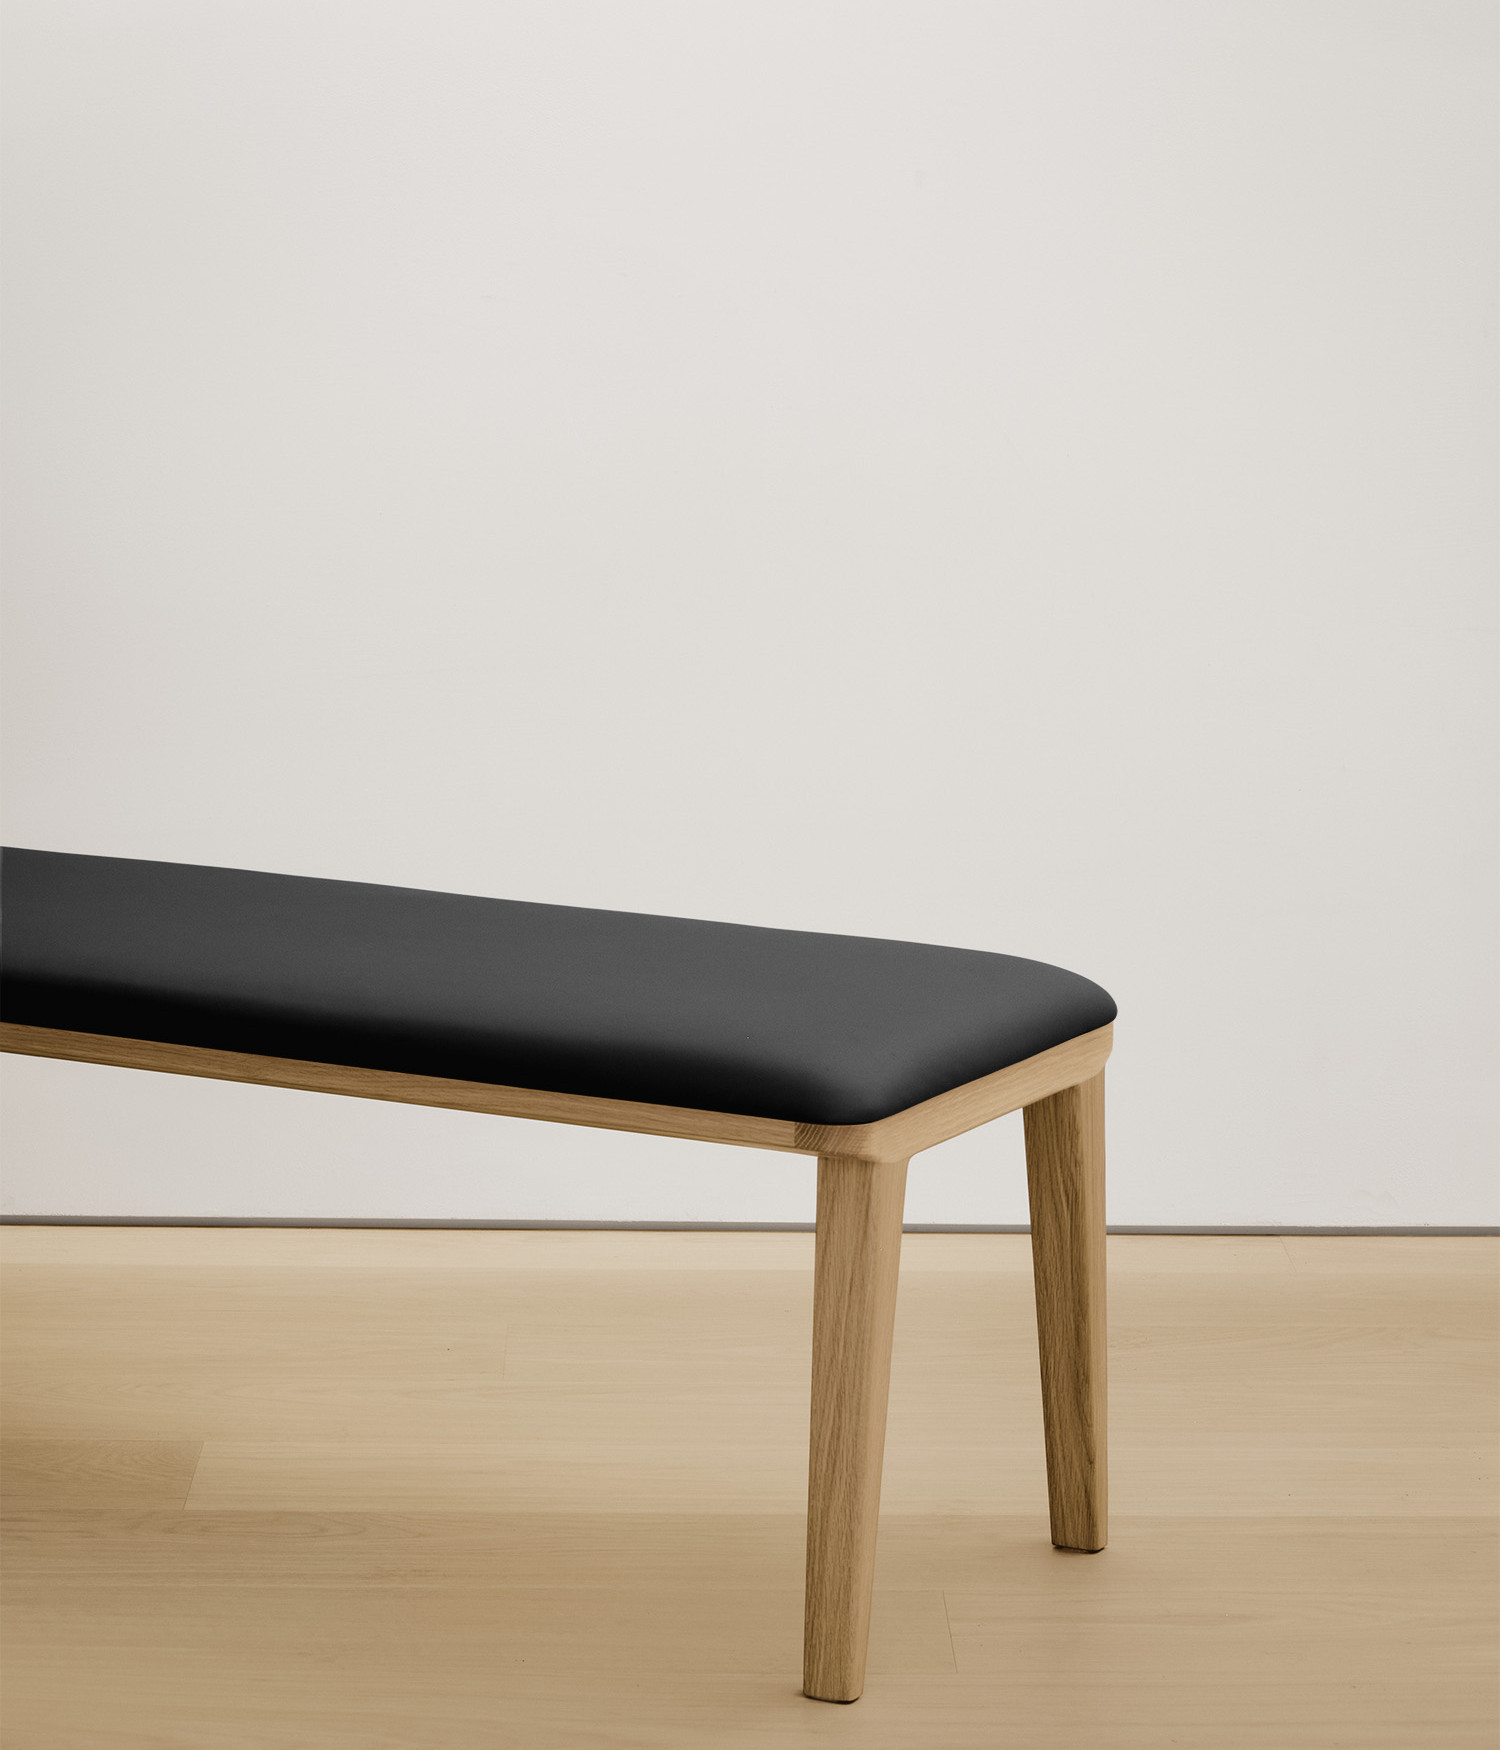  white-oak bench with black color upholstered seat